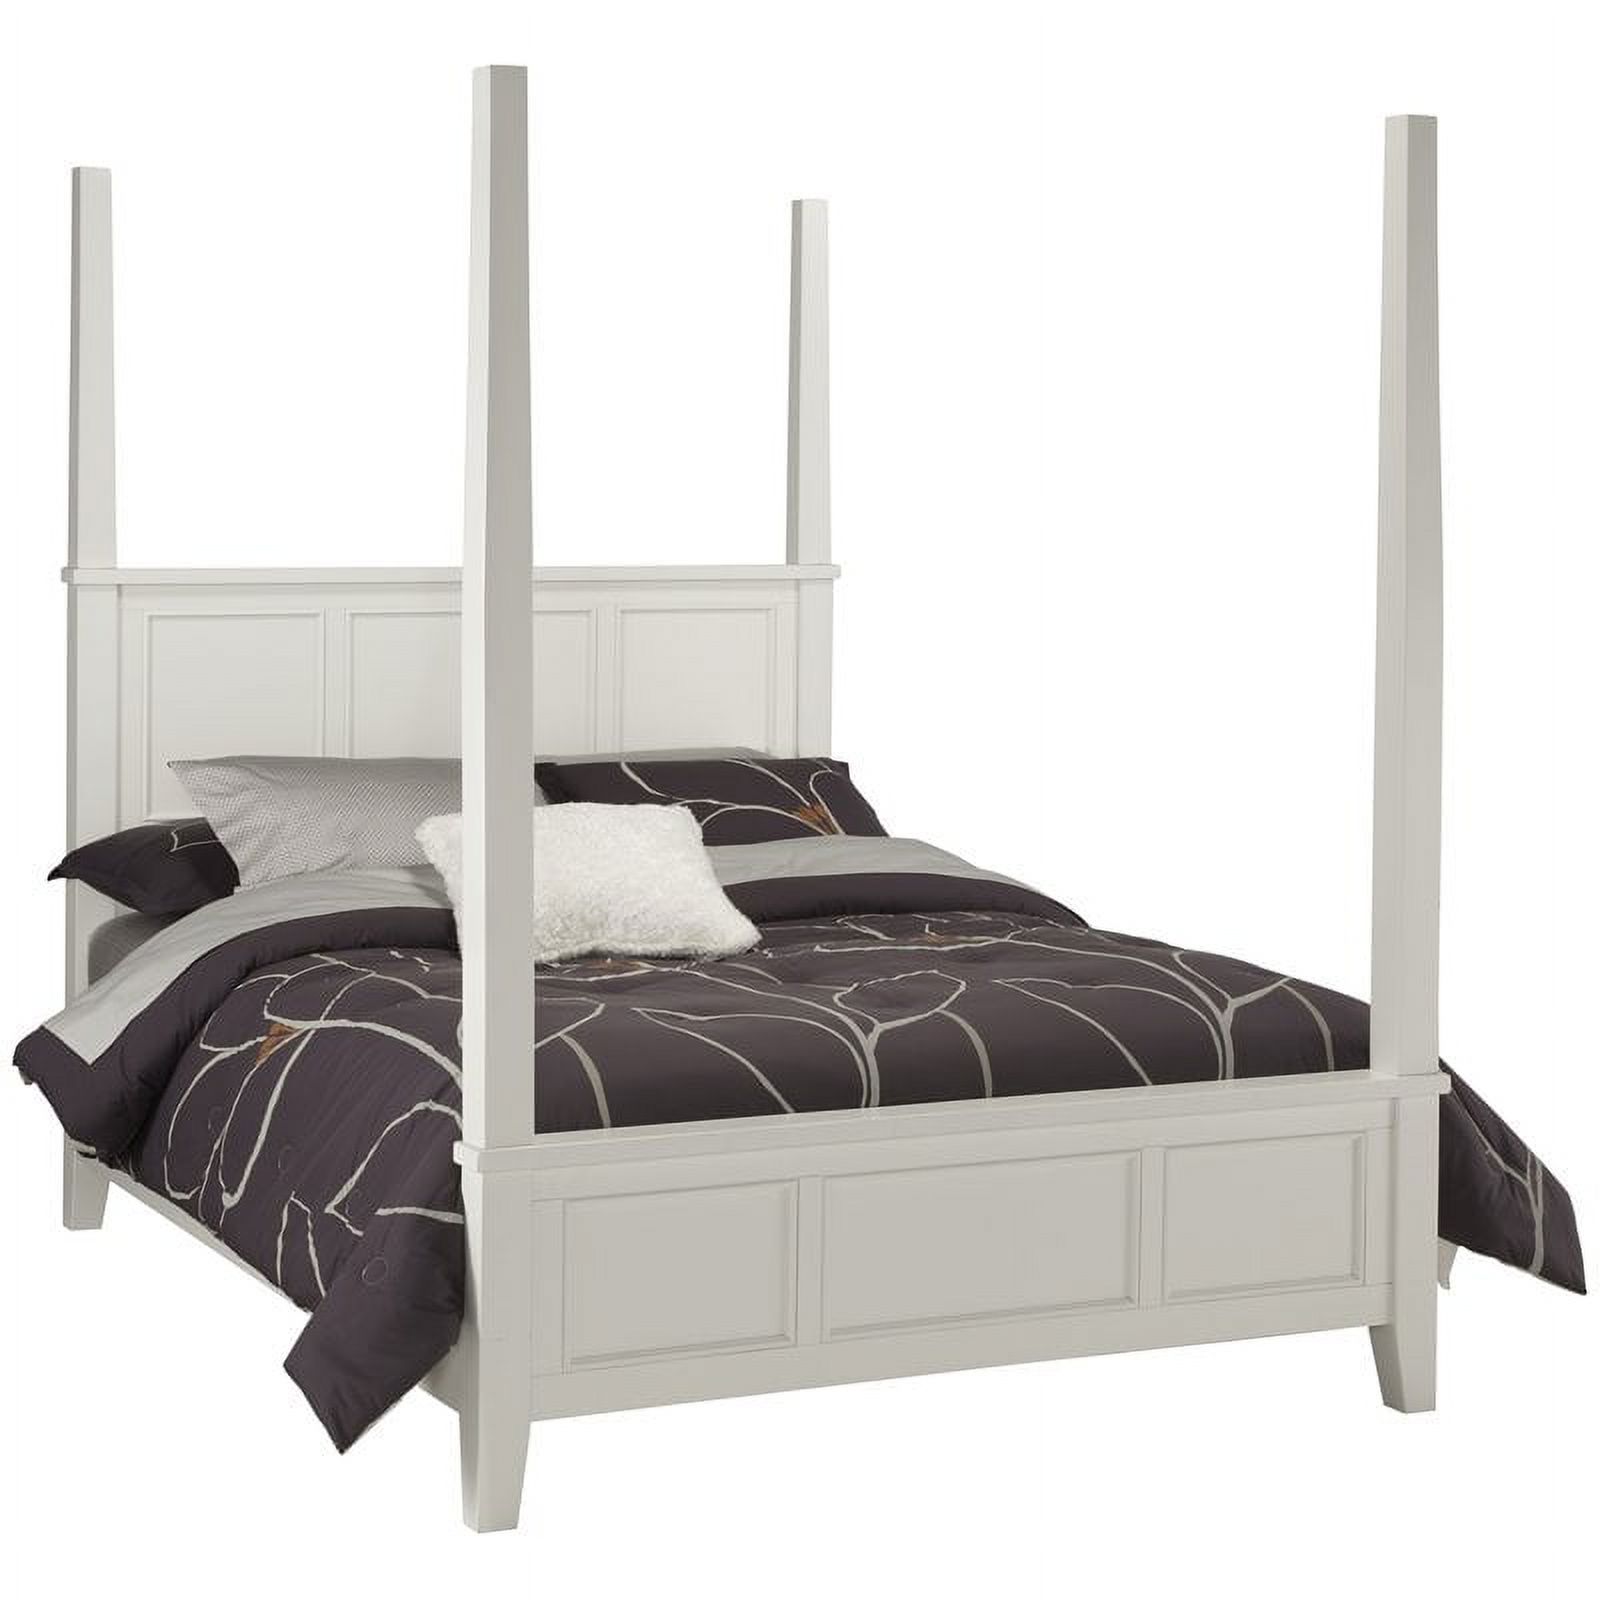 Pemberly Row Contemporary Queen Wooden Poster Bed in White - image 1 of 2